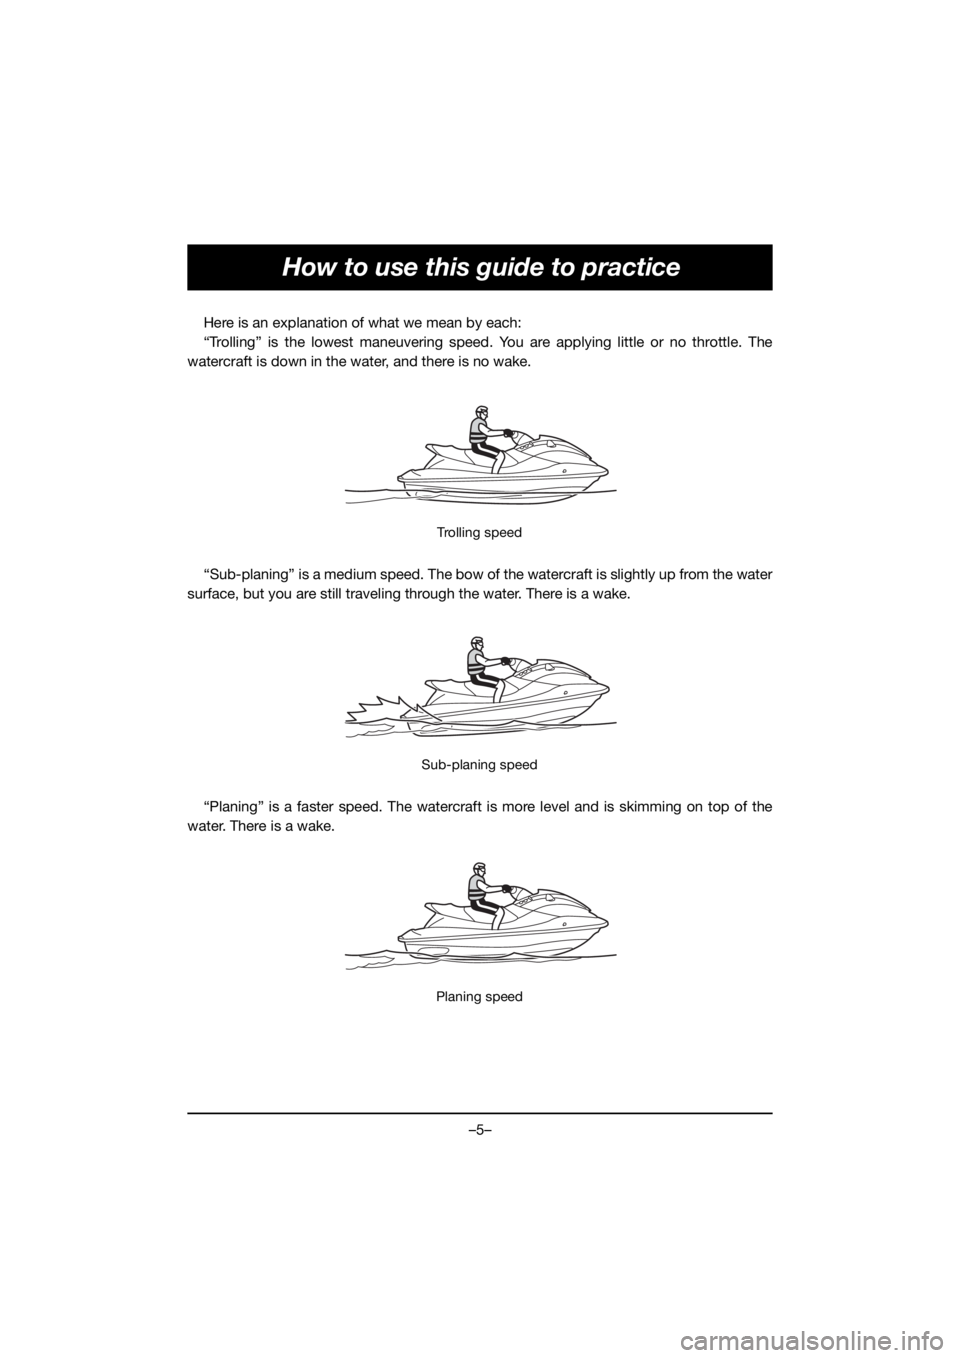 YAMAHA EX SPORT 2020  Manuale duso (in Italian) –5–
How to use this guide to practice
Here is an explanation of what we mean by each:
“Trolling” is the lowest maneuvering speed. You are applying little or no throttle. The
watercraft is down